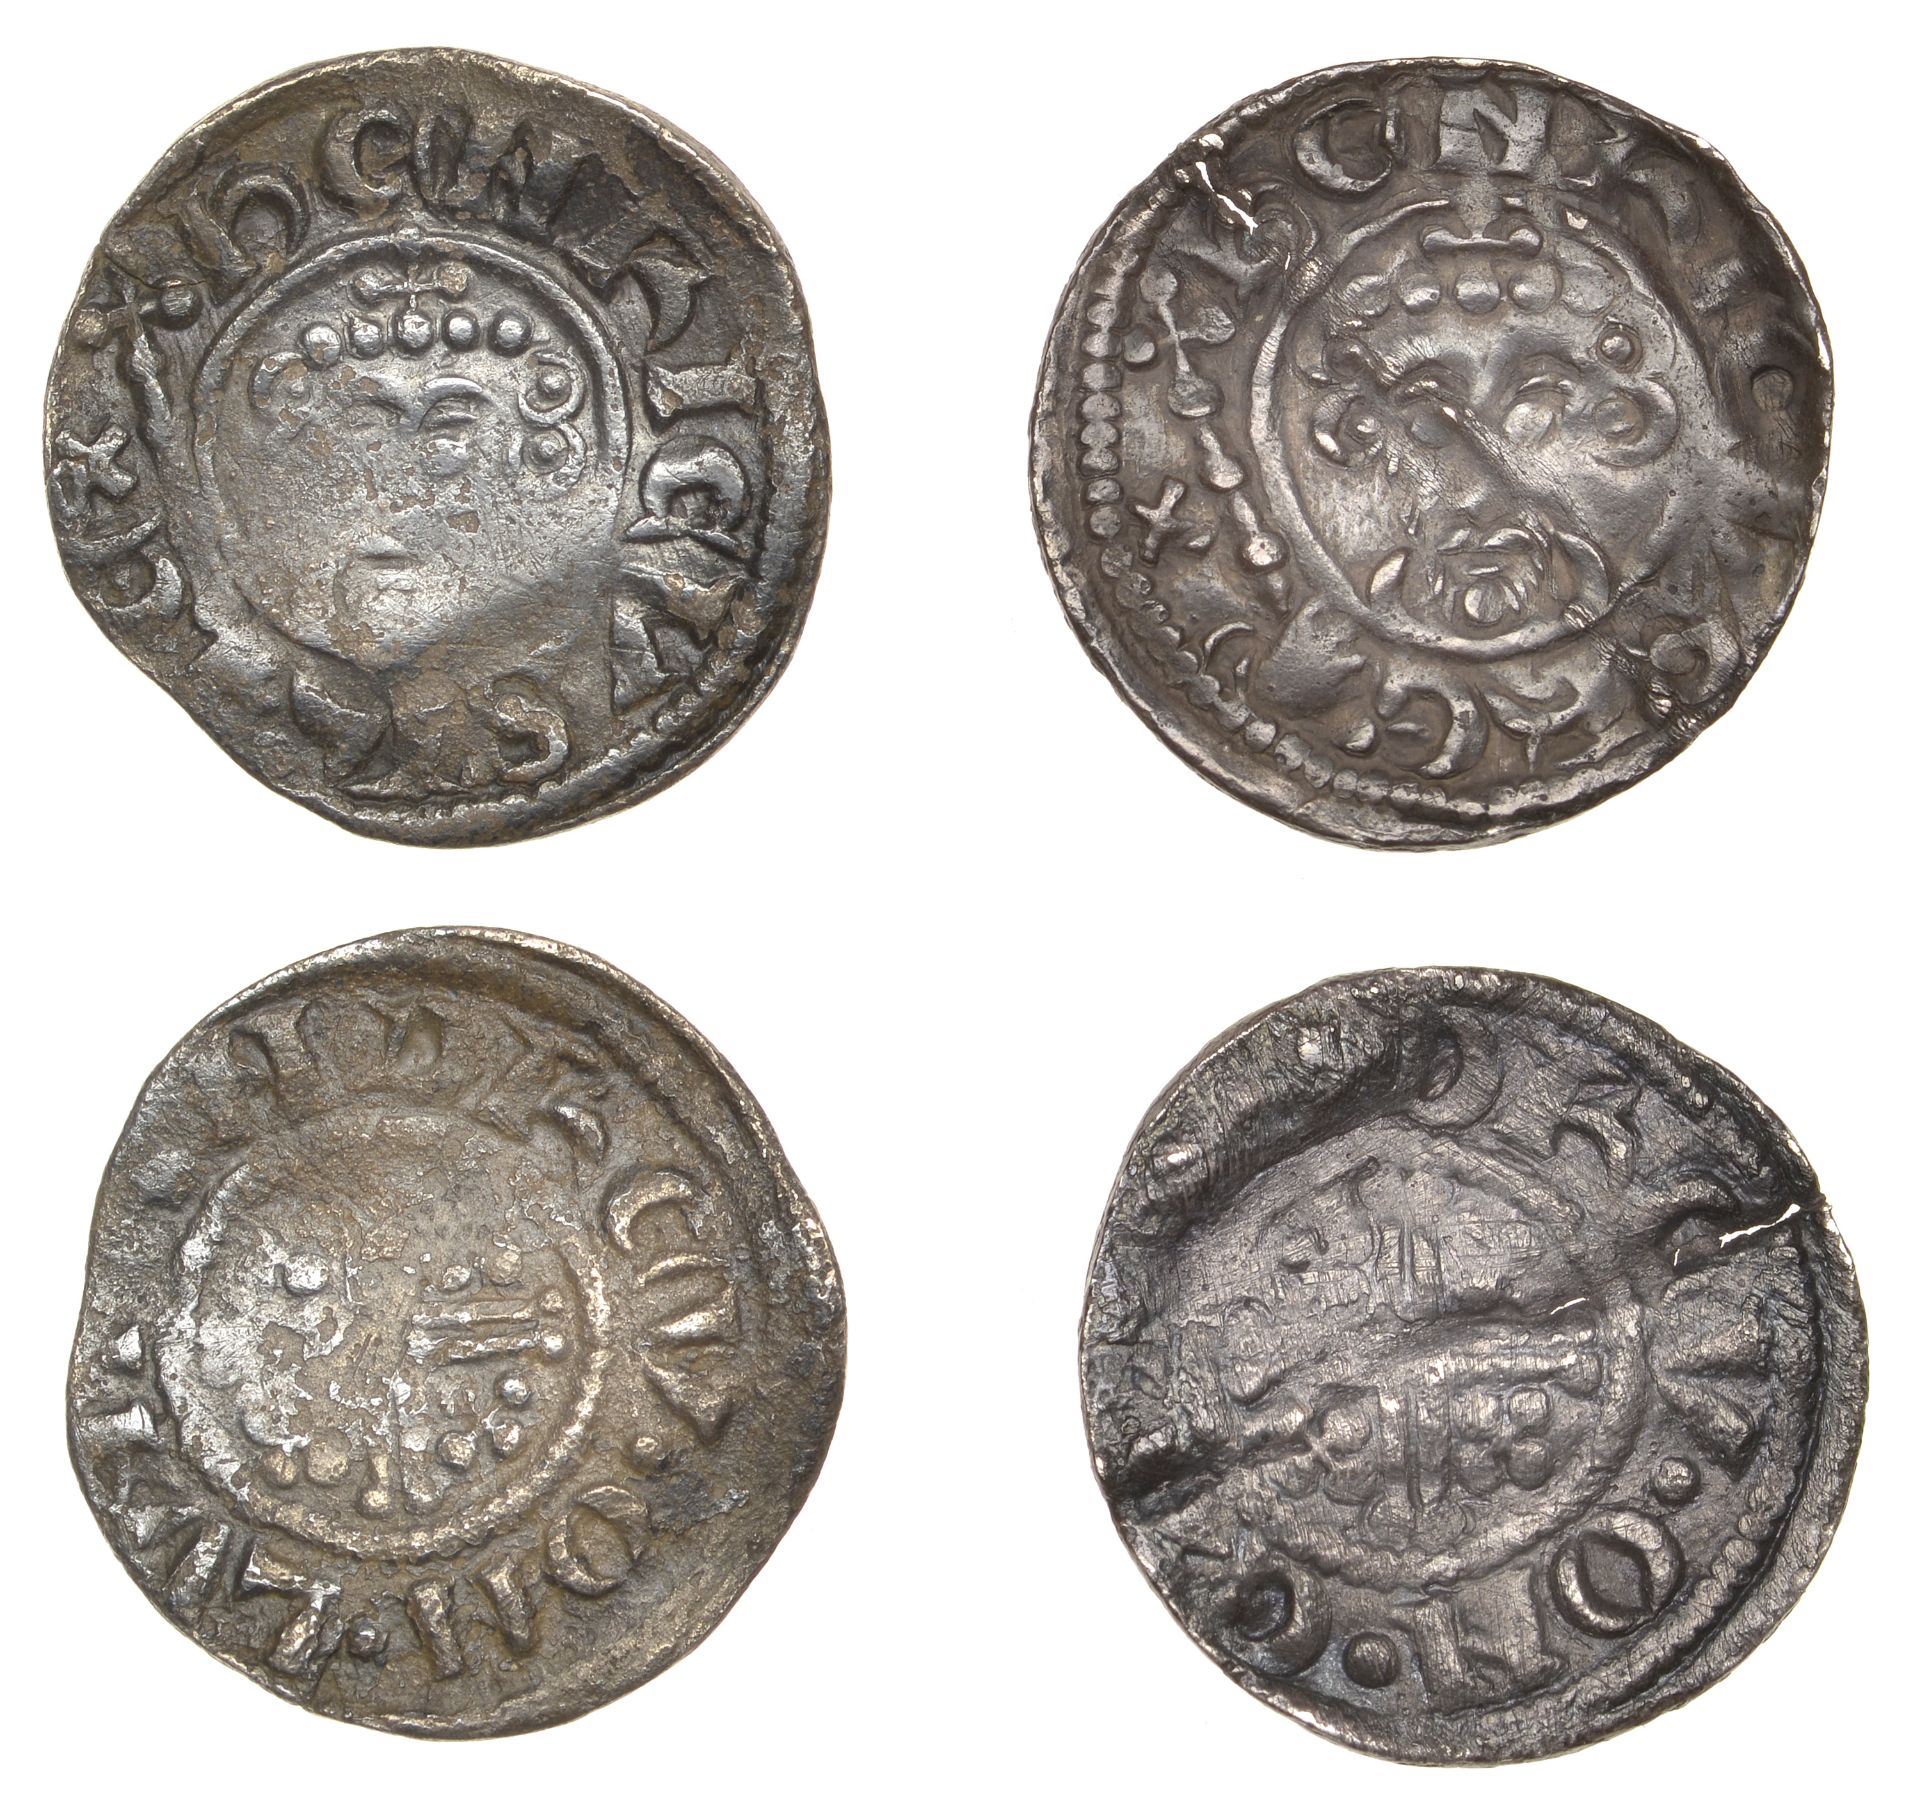 A Collection of Short Cross Pennies, the Property of a Gentleman (Part I)